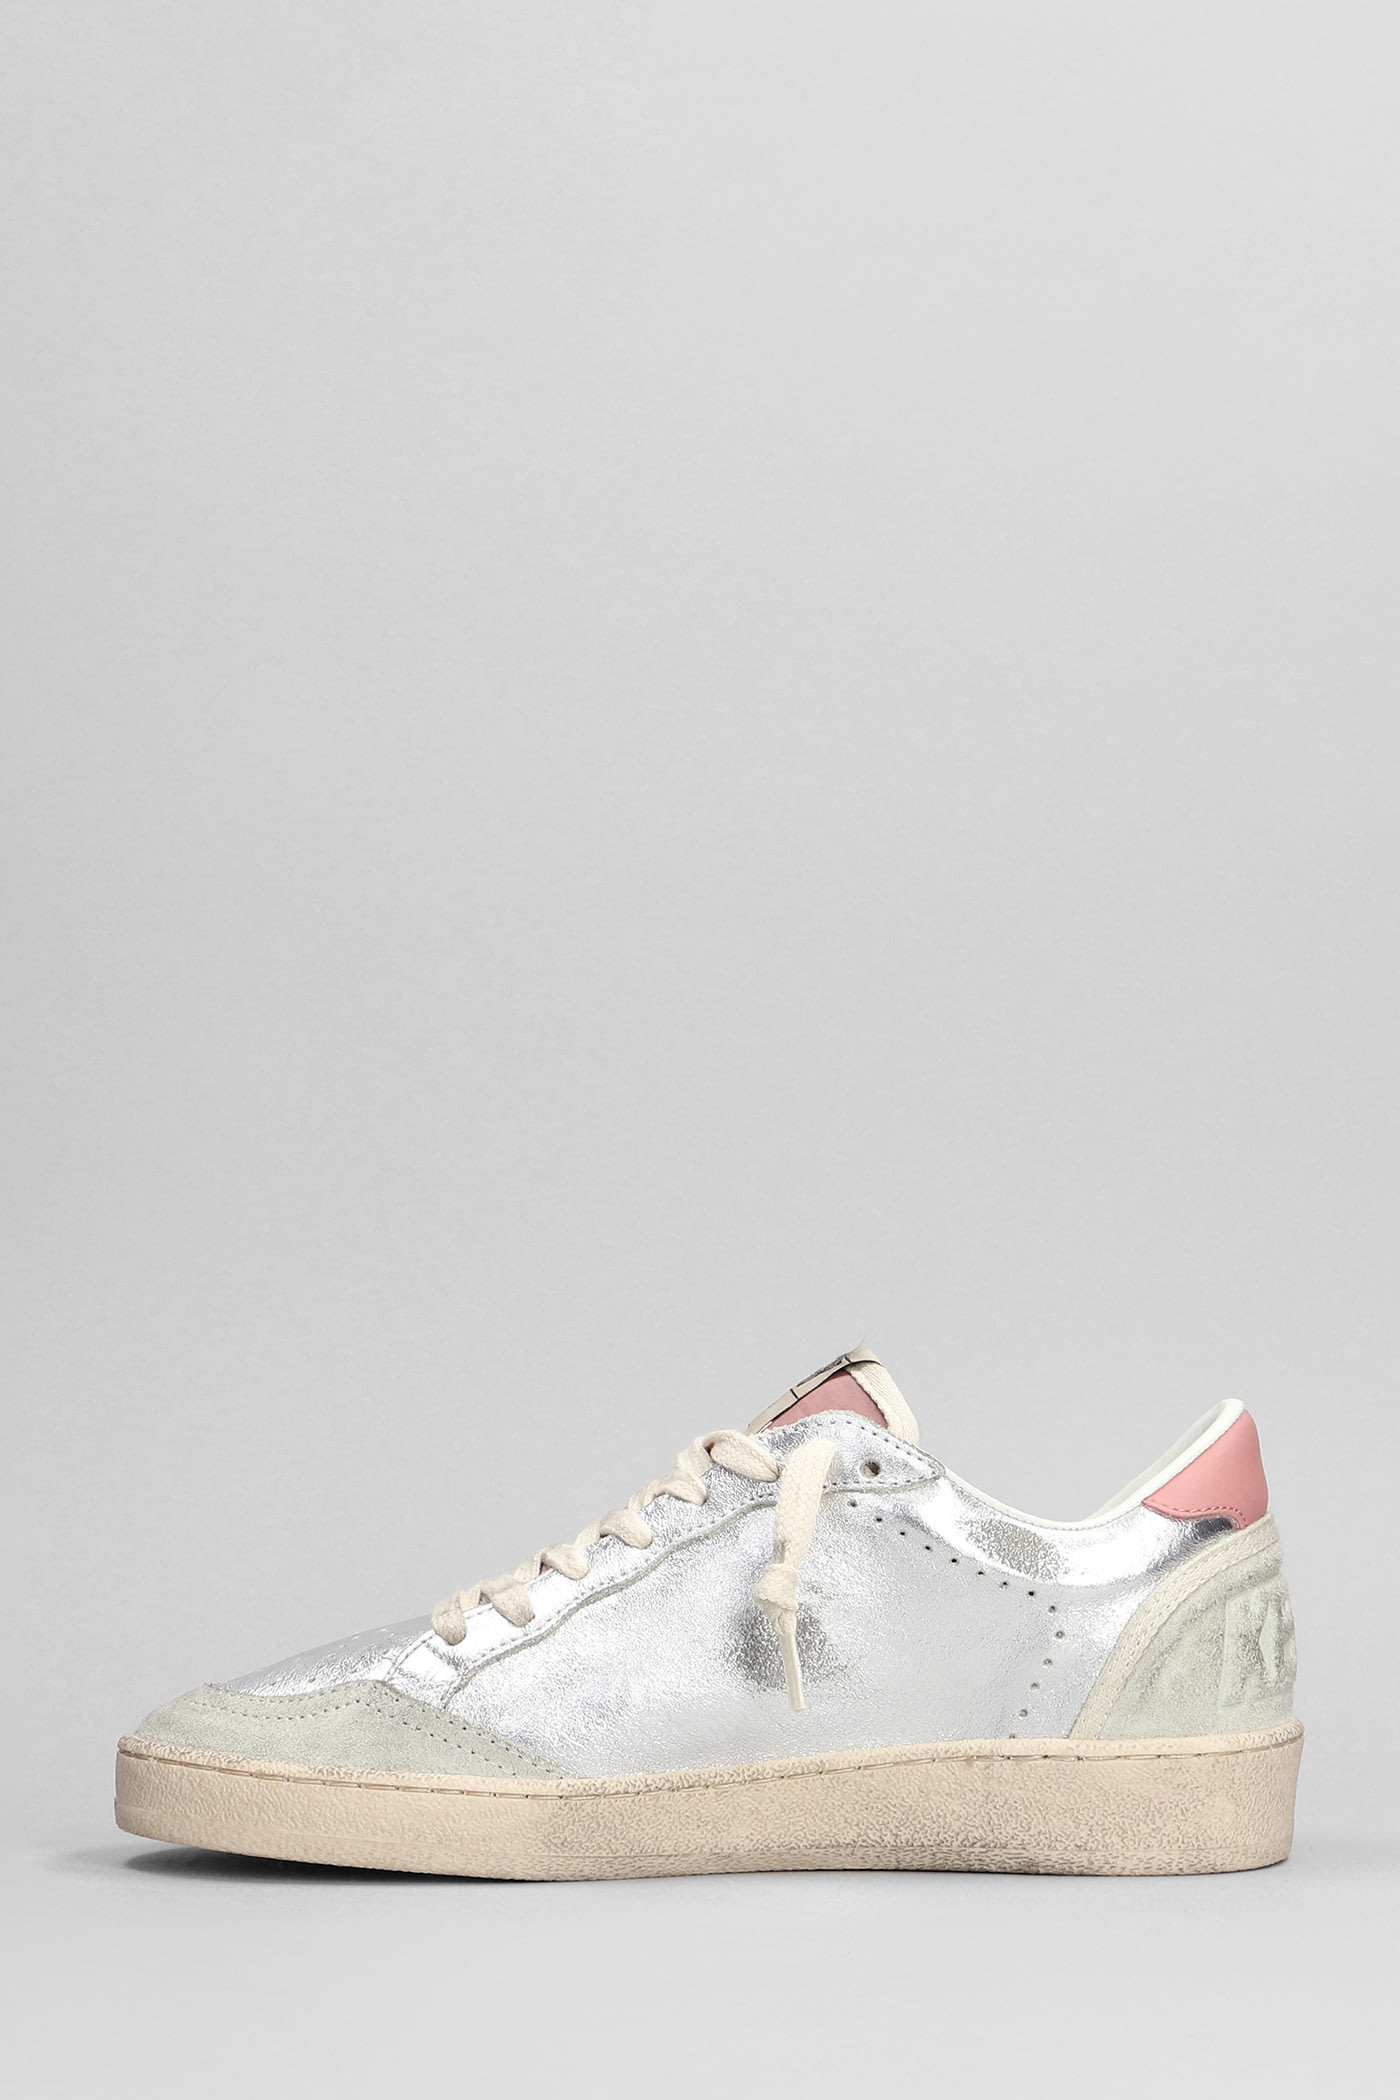 Shop Golden Goose Ball Star Sneakers In Silver Suede And Leather